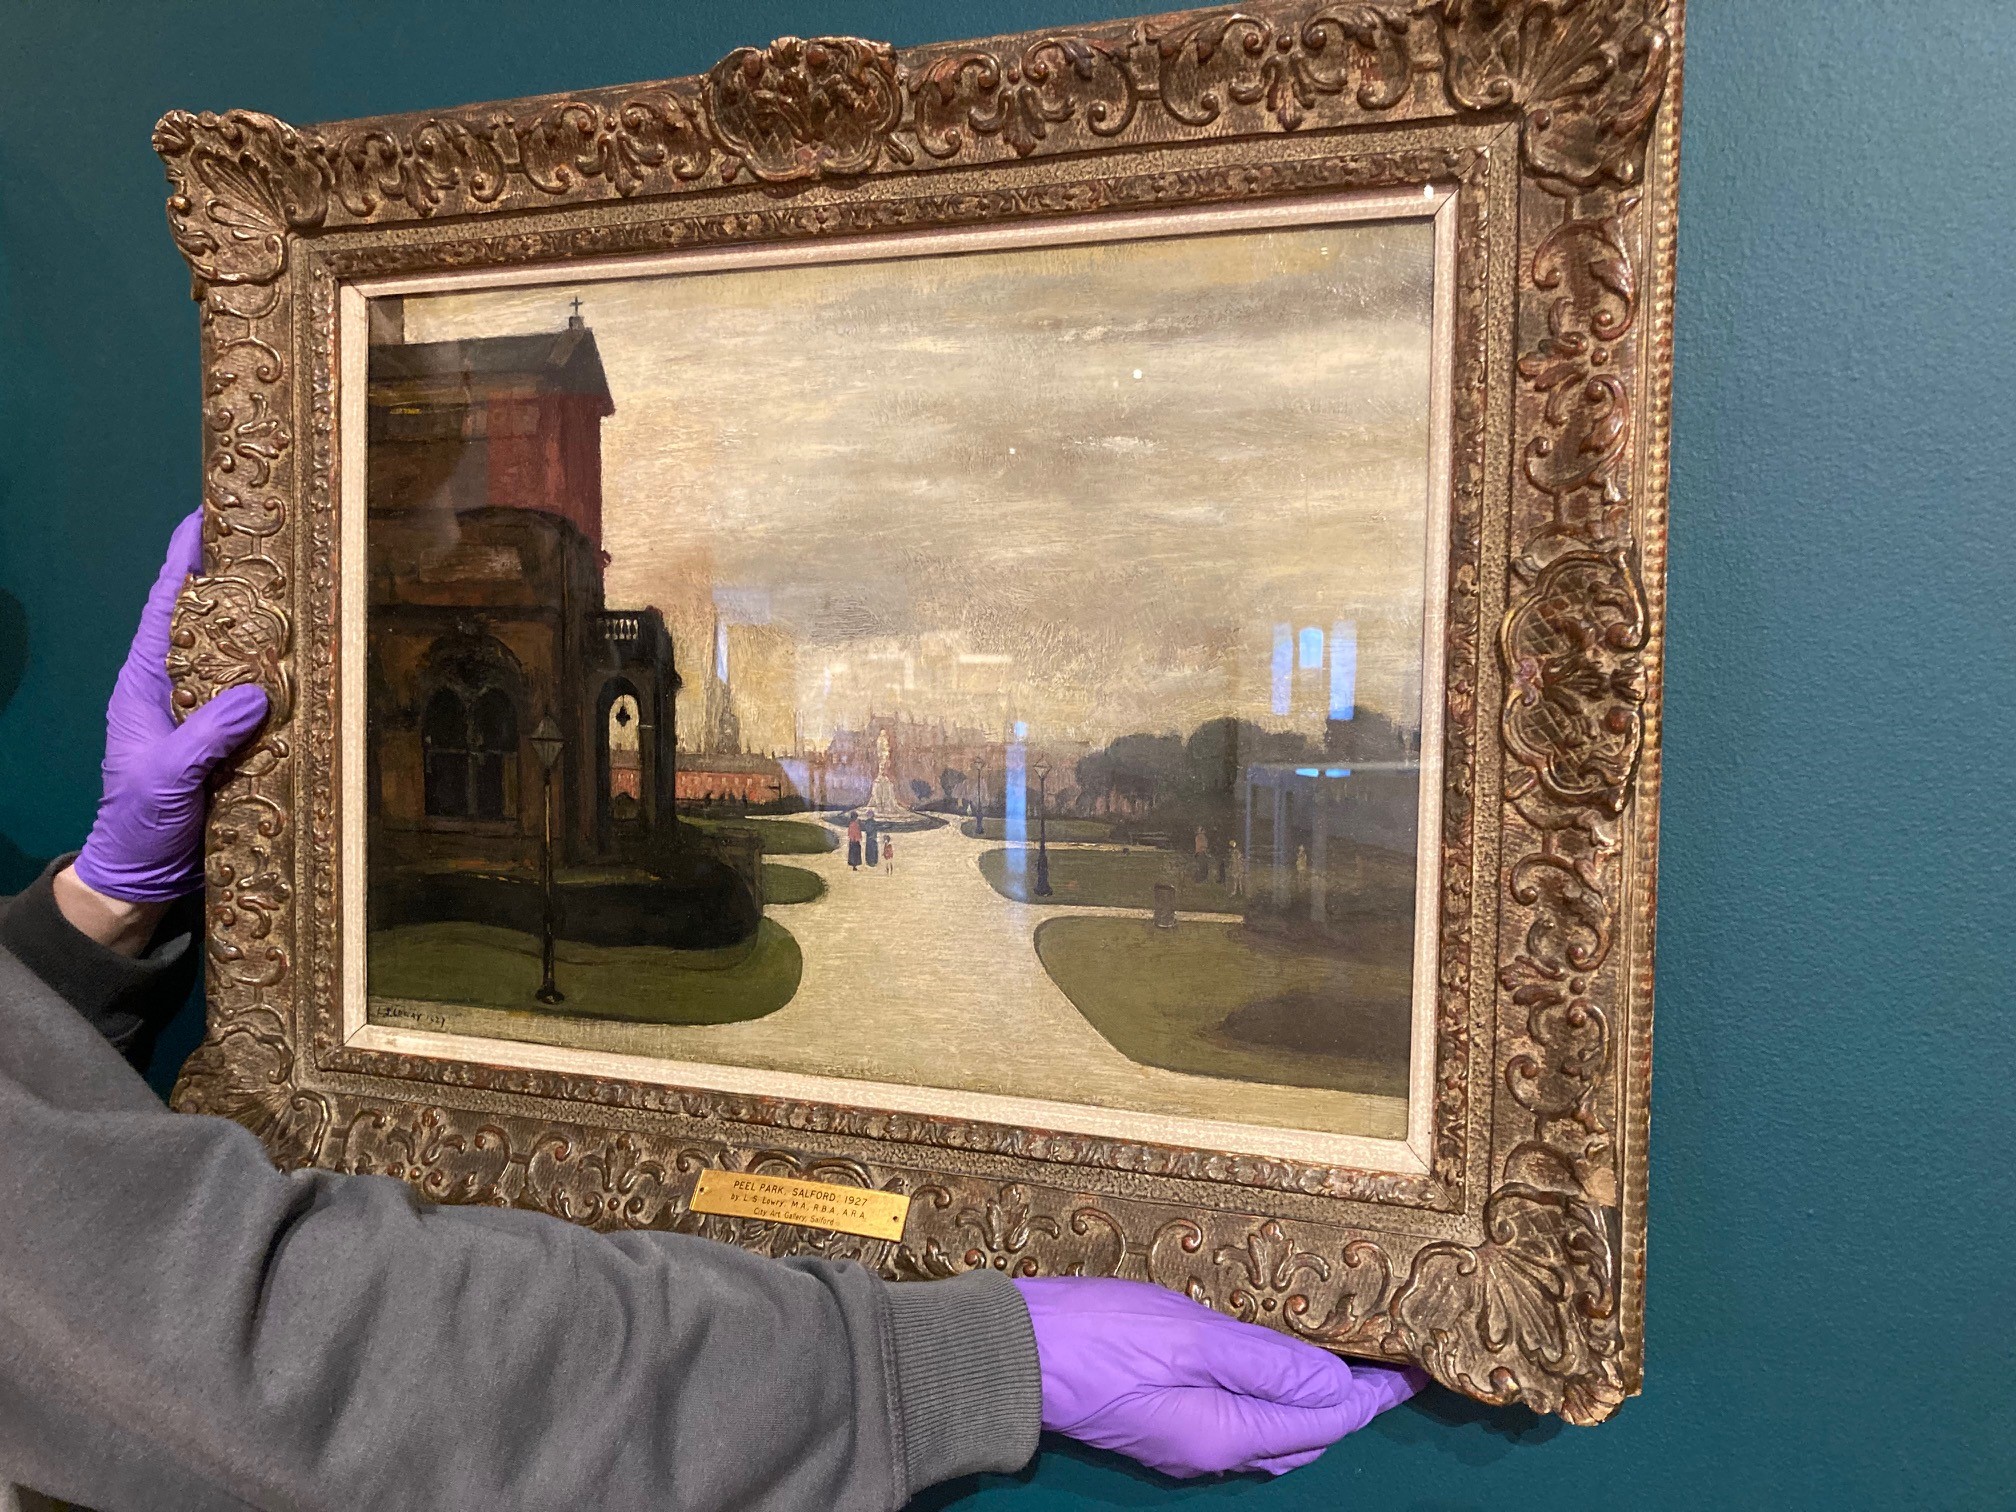 A landscape painting in an ornate gold frame, being held against a green wall. The technicians hands are visible, holding the work up using purple gloves. The image is a historic oil painting by LS Lowry, showing the early days of Peel  Park